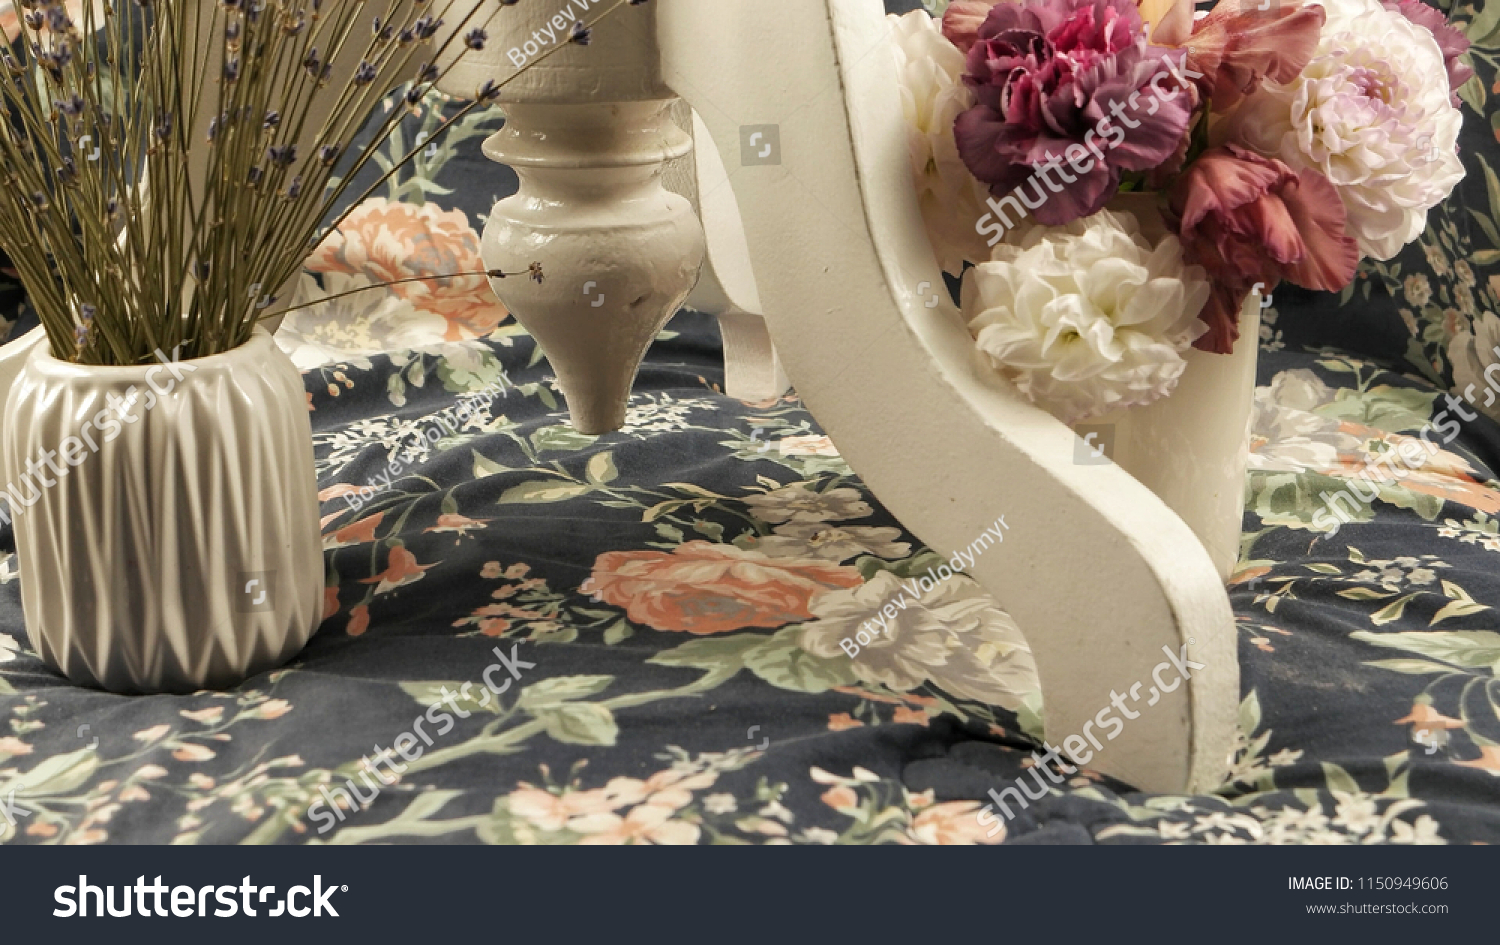 A leg of a white wooden table and a vase with flowers on a fabric with a floral pattern, a floral arrangement. #1150949606